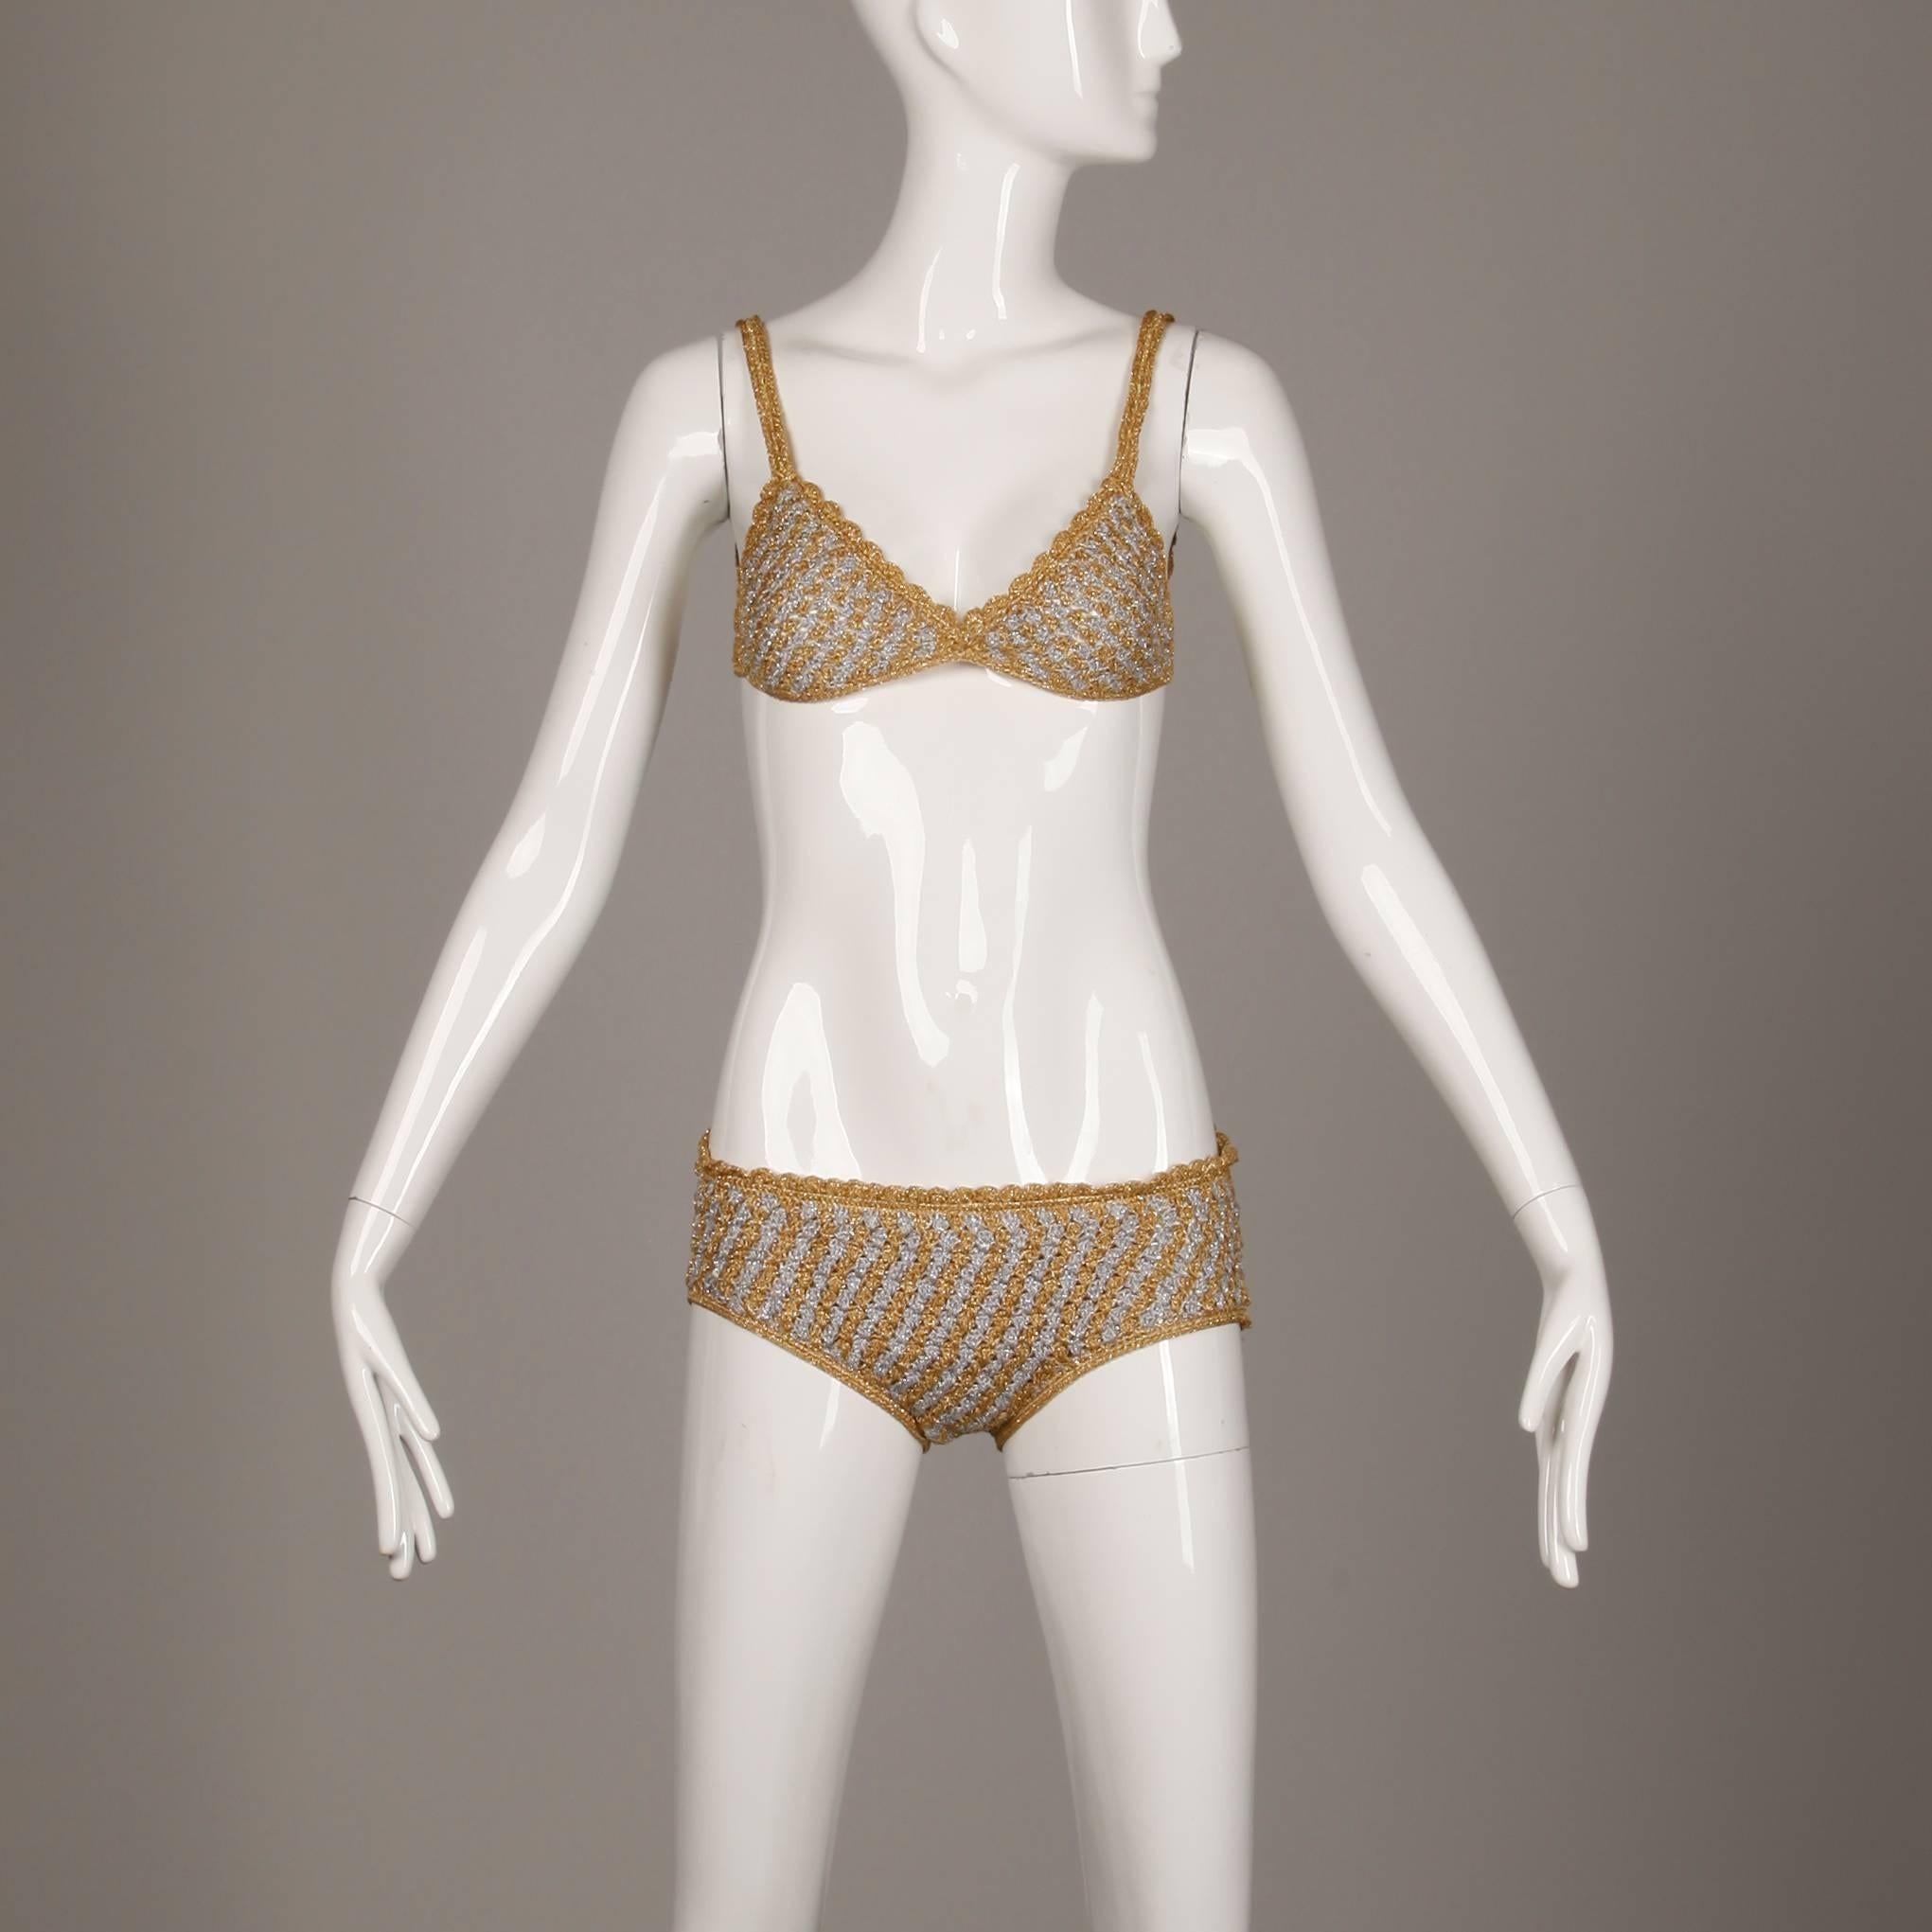 Bottom Lined
Top Unlined
Top Back Rings Closure
Marked Size: 12
Estimated Size: XS
Color: Gold/ Silver
Fabric: Metallic Yarn Crochet
Label: Moggie

Measurements: 

Bust: 32"
Low Waist: 26"-28"
Hips: 36"
Strap Length: